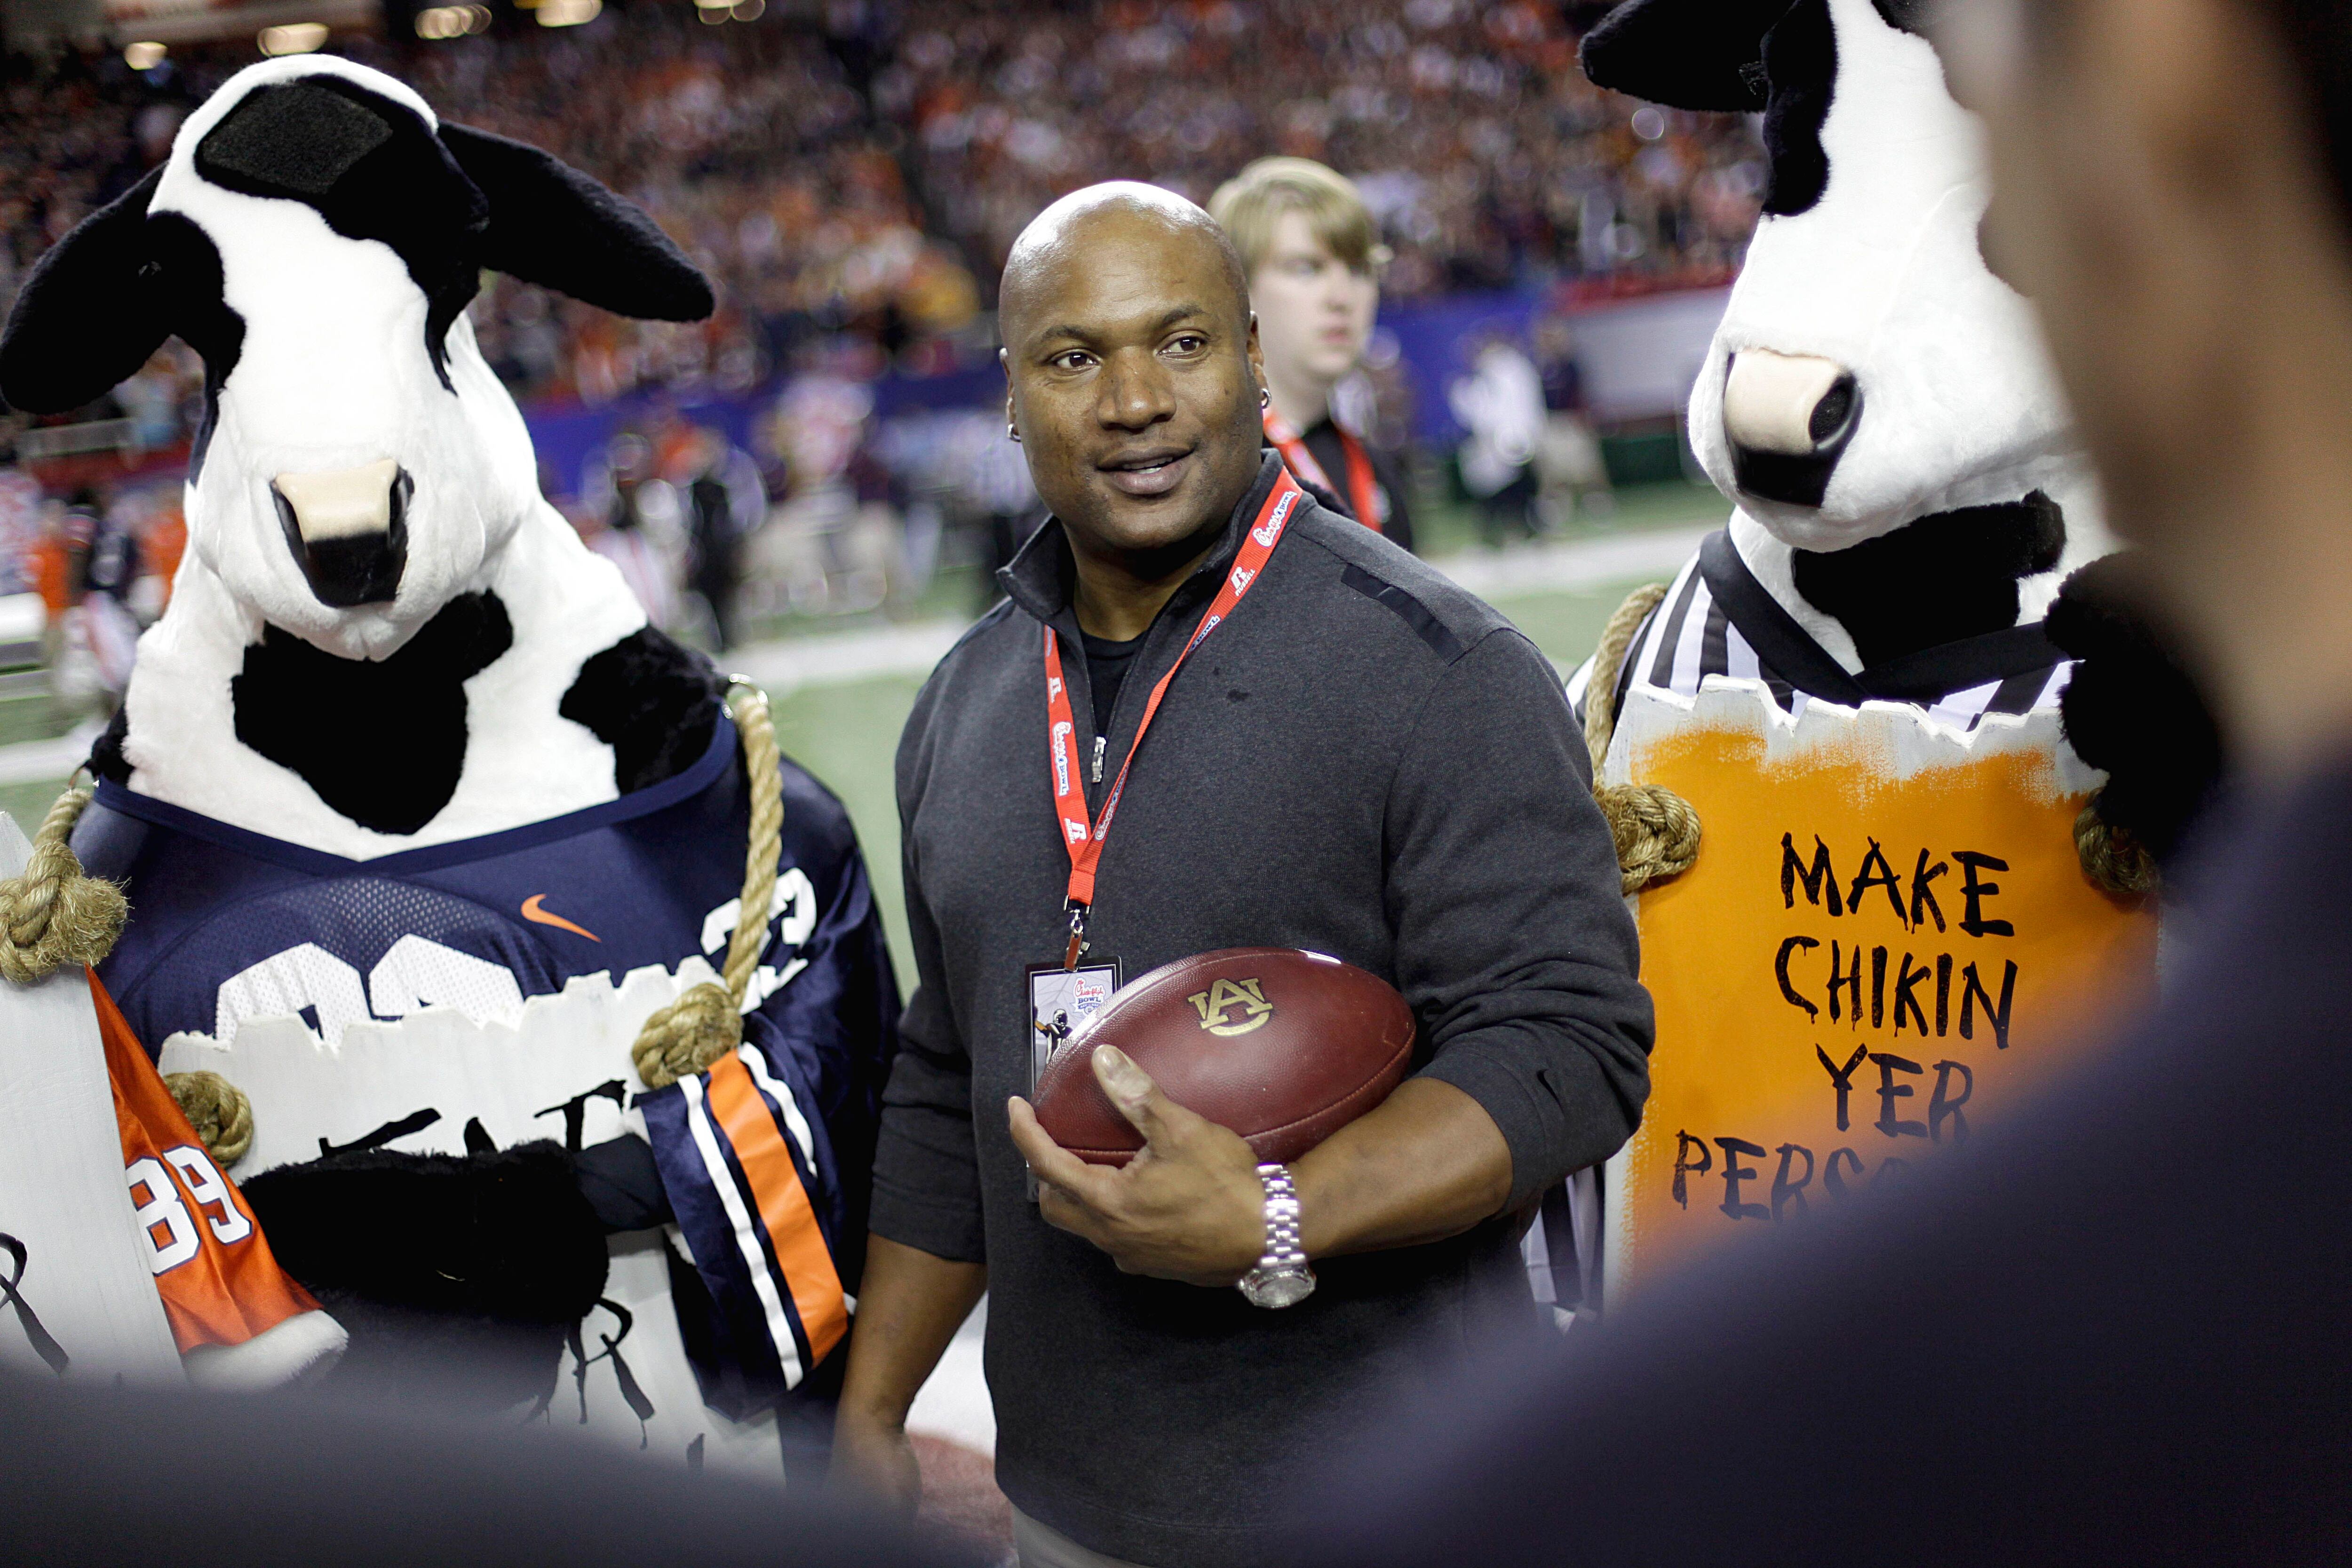 Former sports star Bo Jackson donated to pay for funerals for victims of  the Uvalde massacre